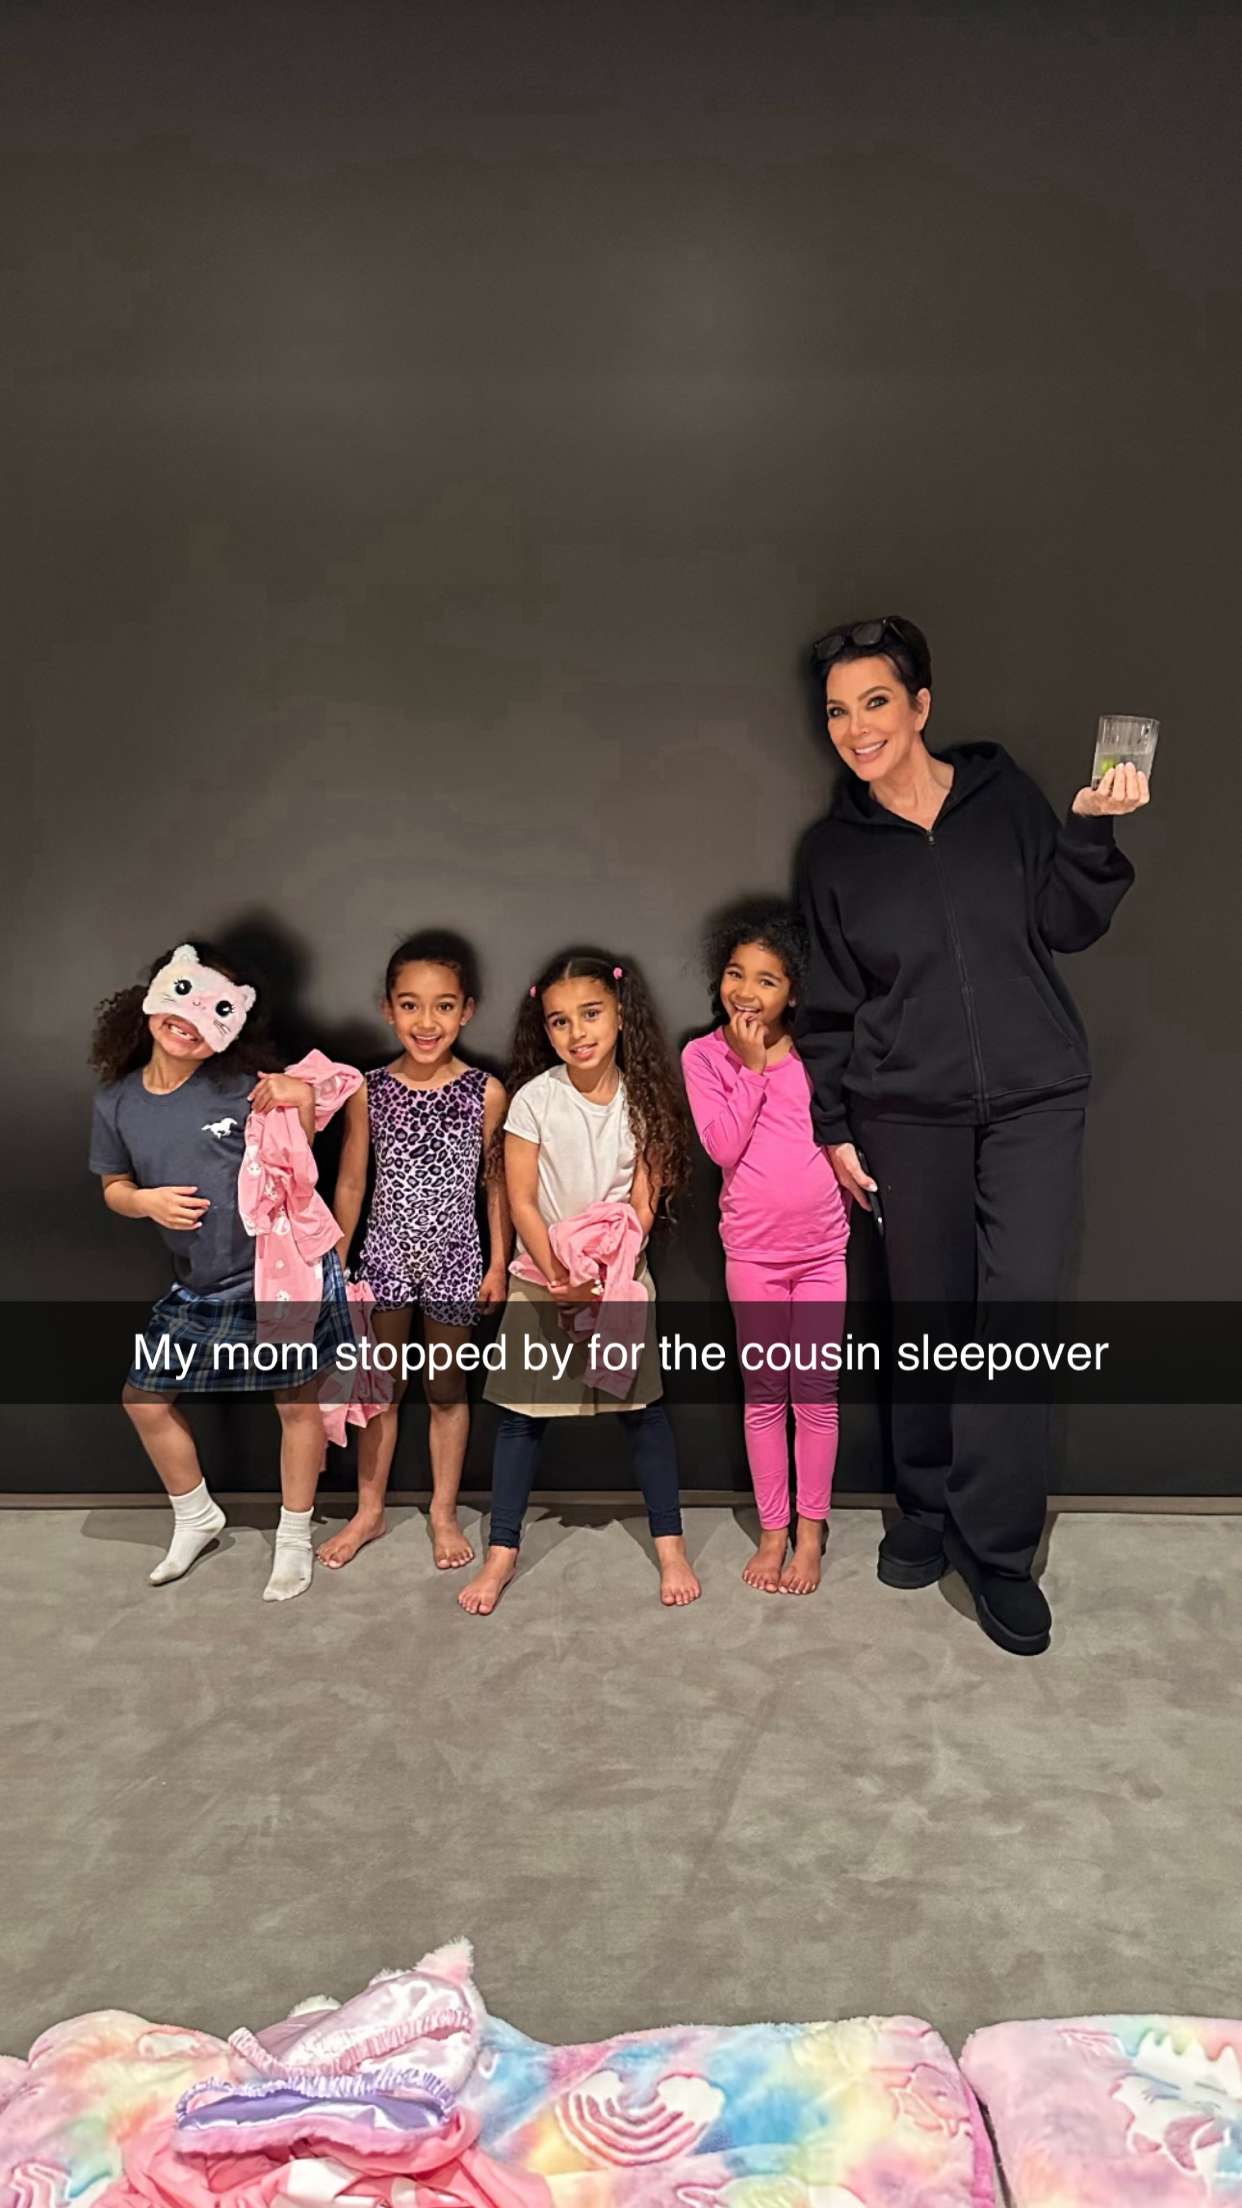 Cousins Dream Kardashian, Chicago West, Stormi Webster and older sister True posed with Kris Jenner